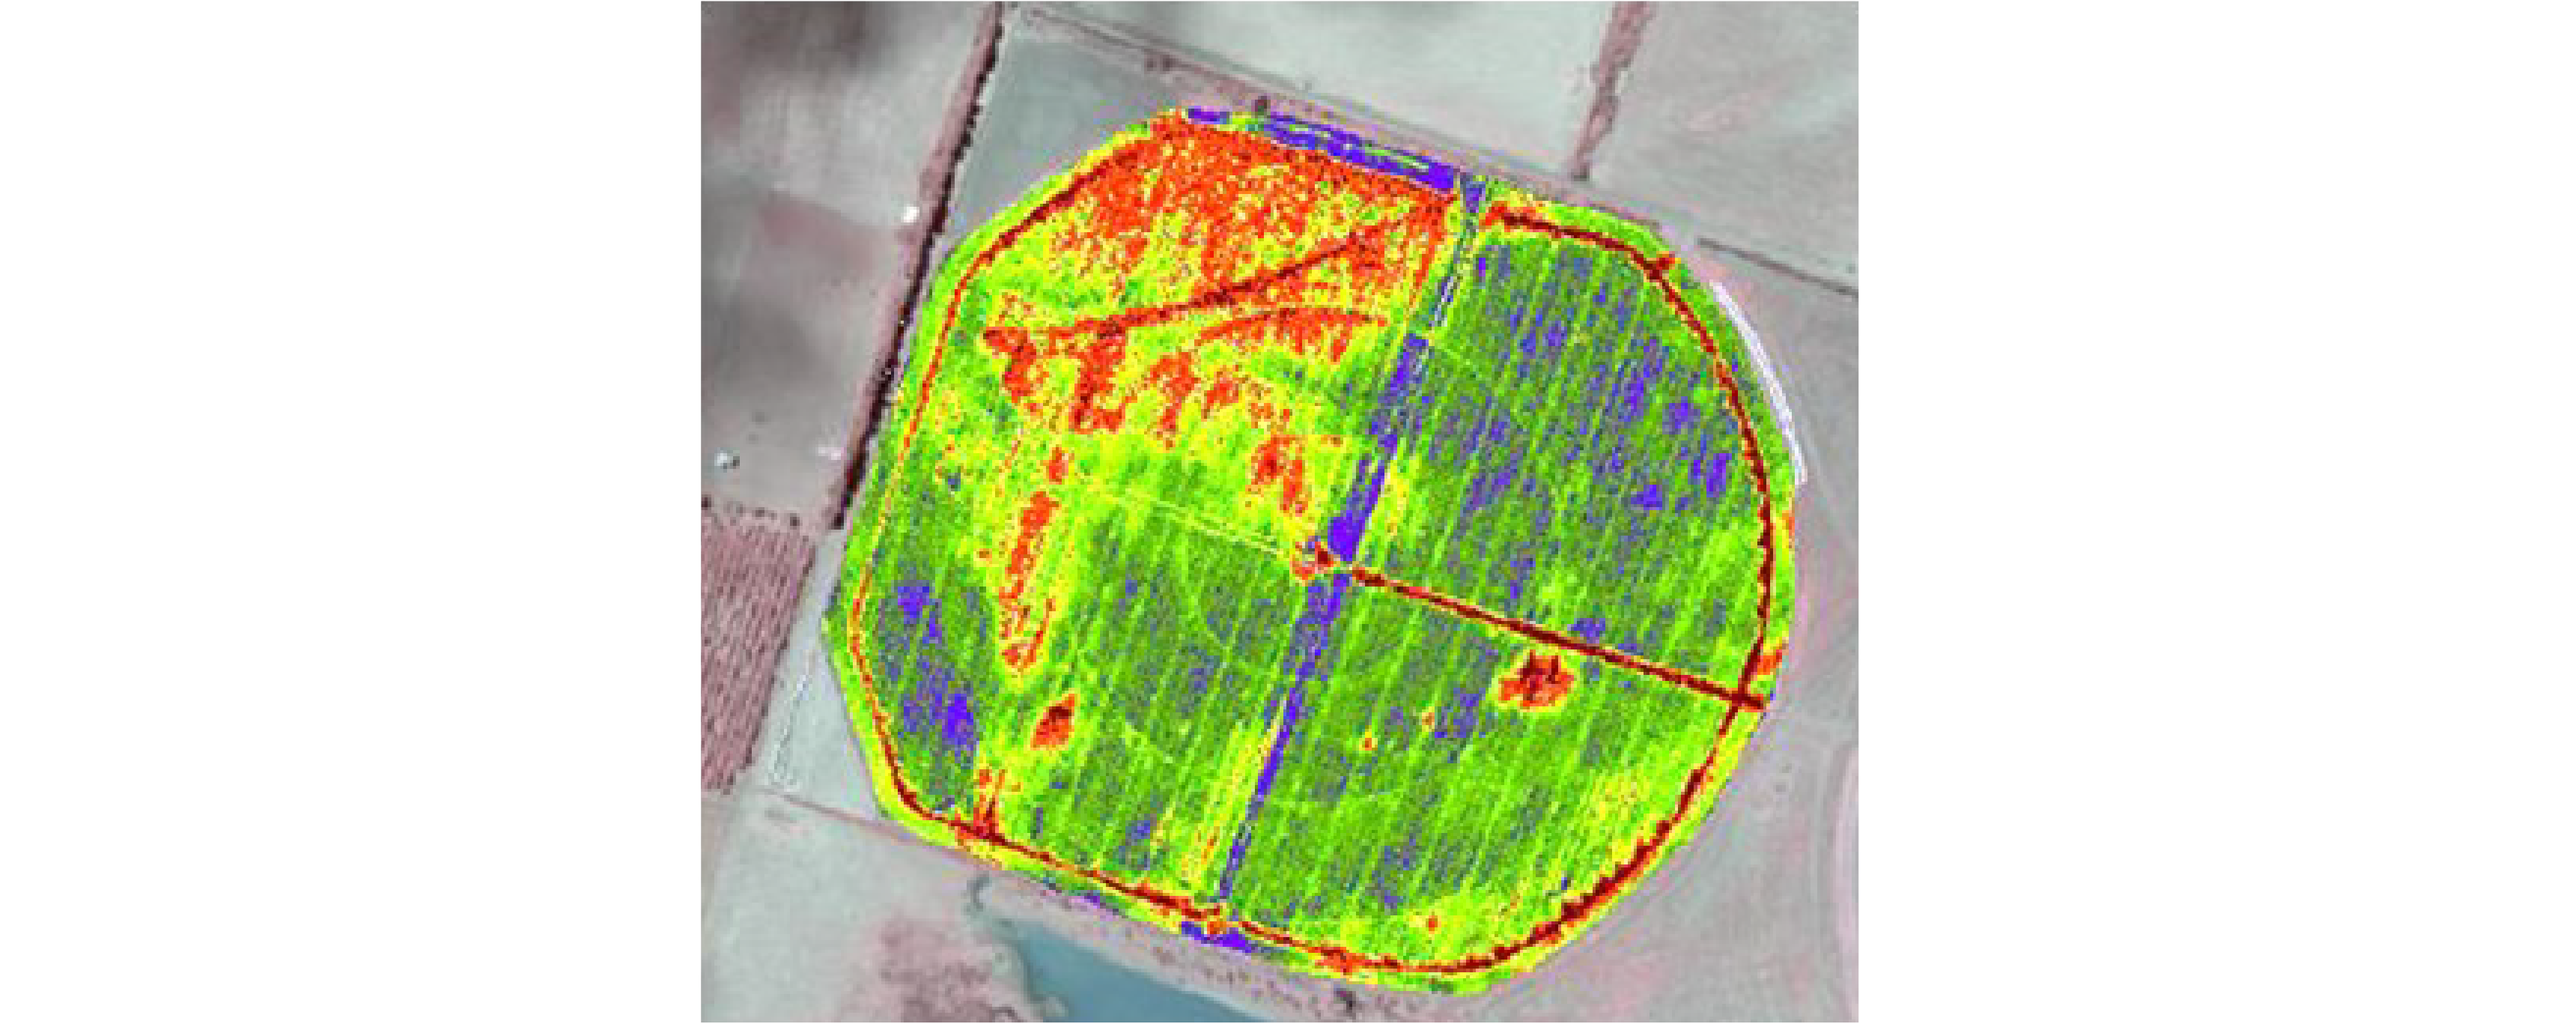 Figure 23. NDVI imagery of an onion paddock with red areas having less plant vigour than green and blue areas  due to waterlogging. Image by Greg Gibson.